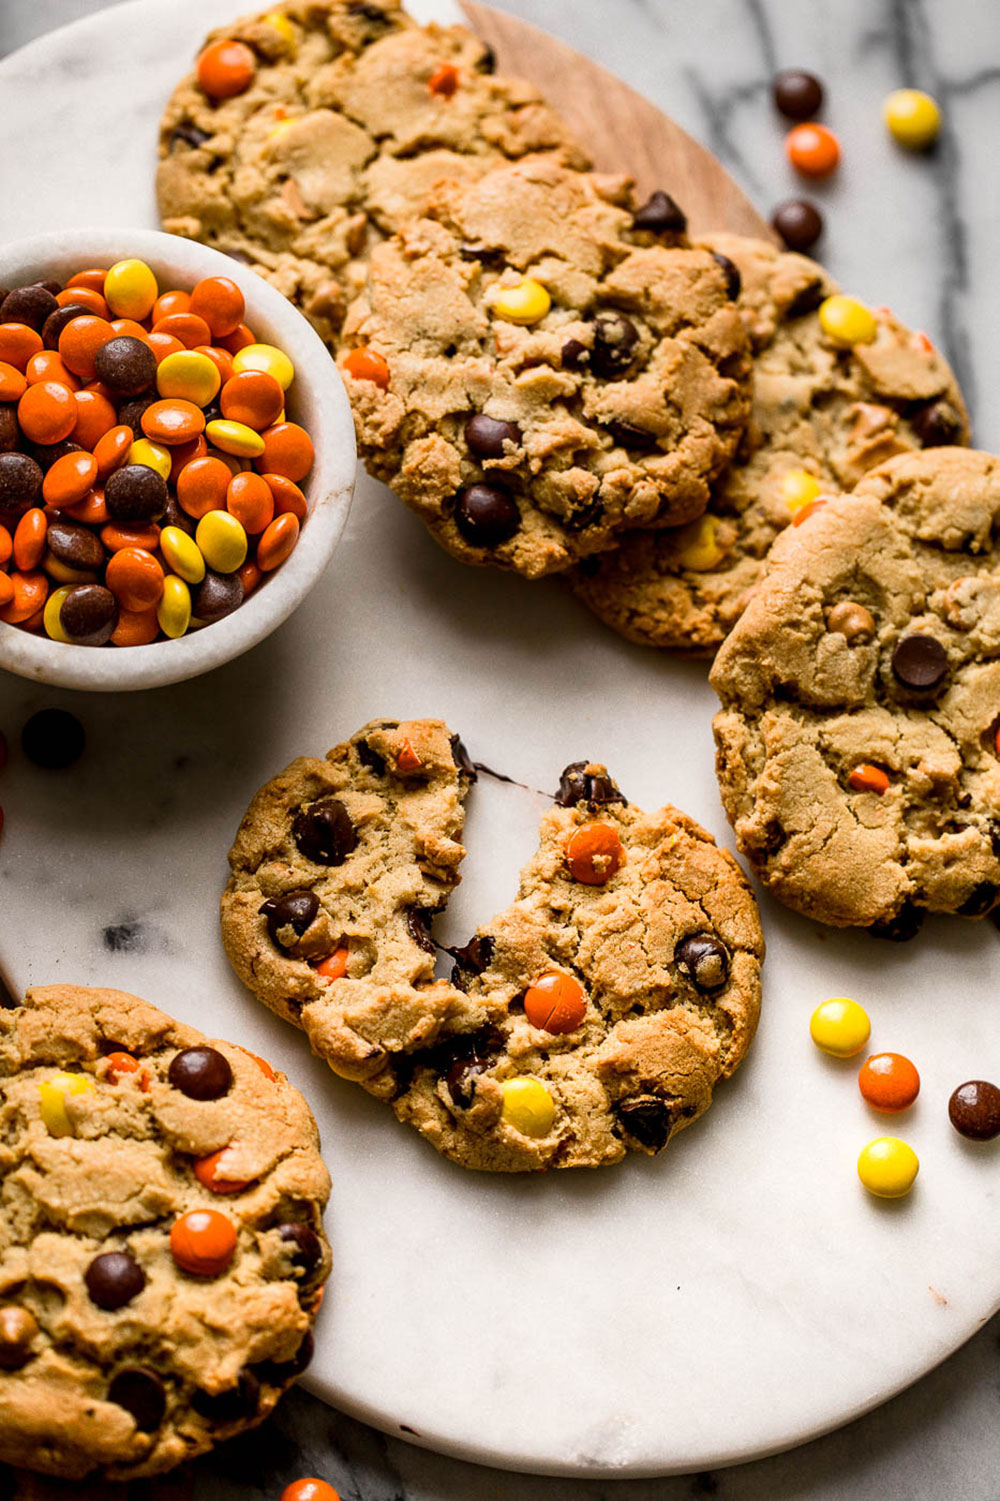 several Giant Reese's Pieces Chocolate Chip Cookies on a marble background, with one cookie broken in half and a bowl of Reese's Pieces to the side